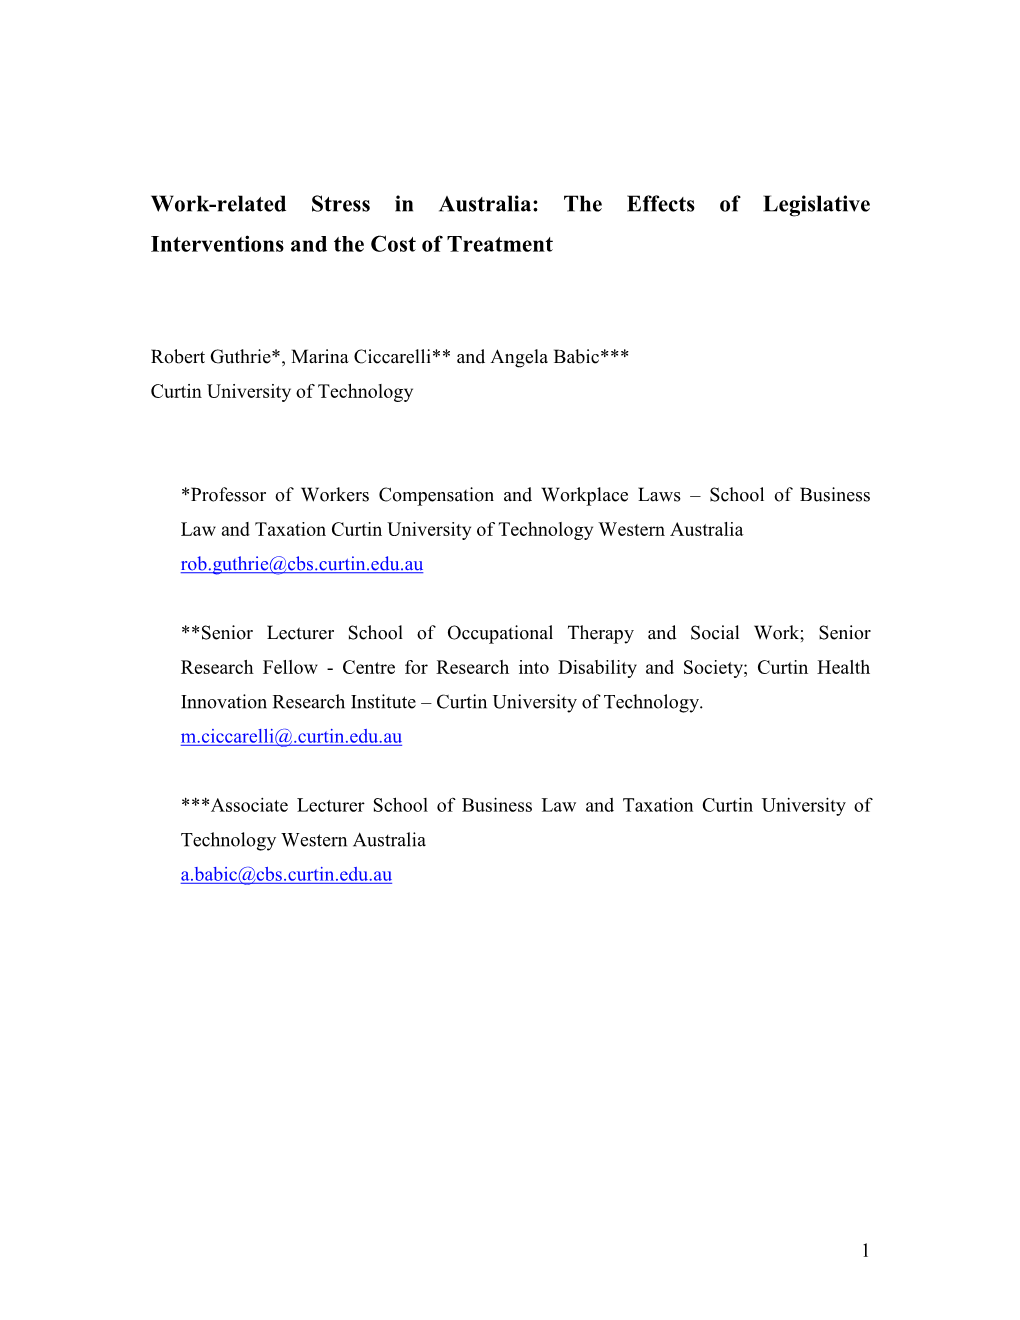 Legislative Interventions and Their Effects on Work Related Stress And